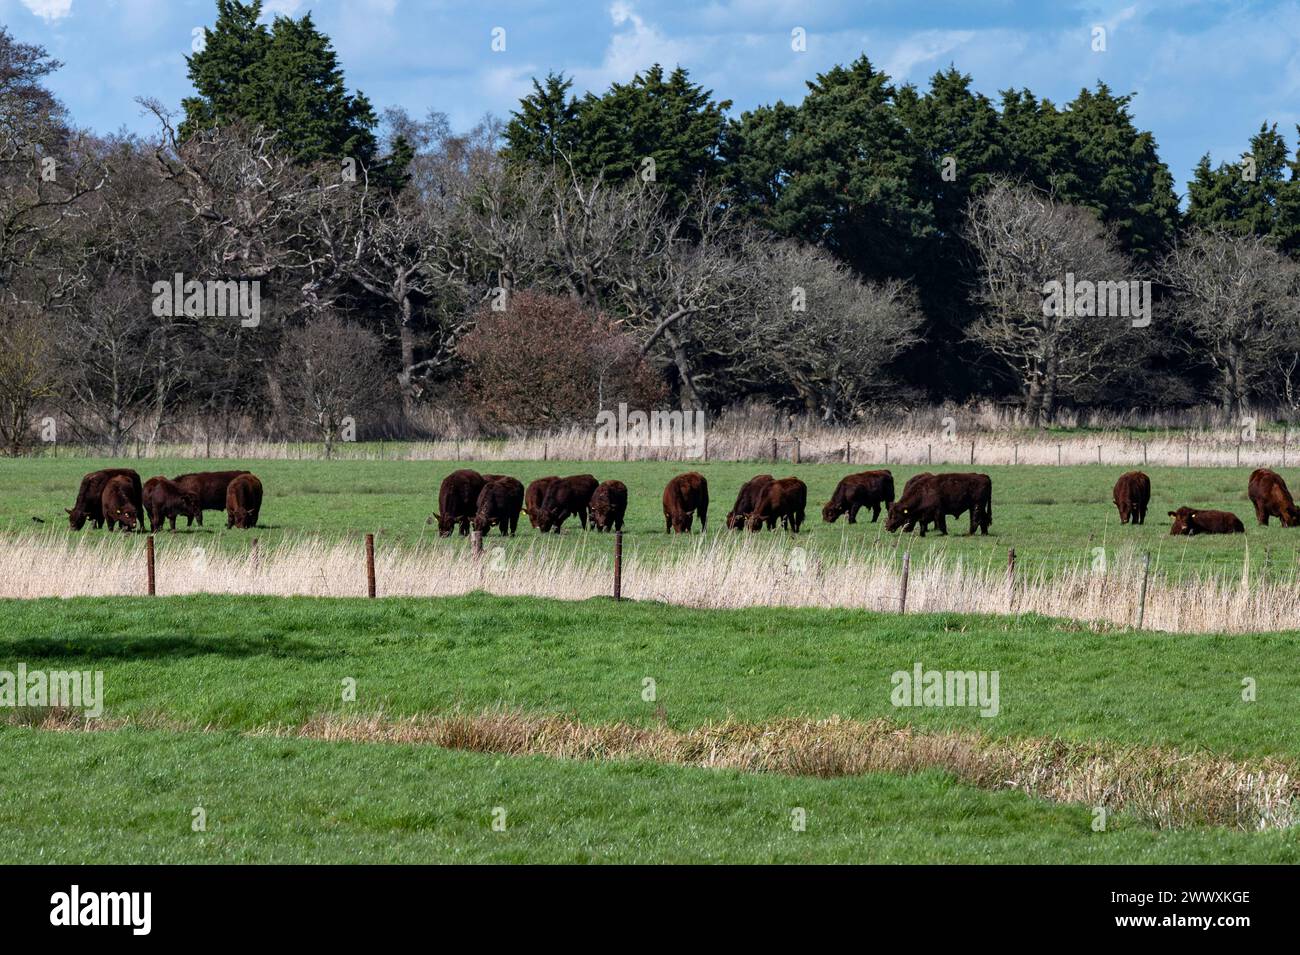 Lincoln Red Cattle Iken Suffolk Royaume-Uni Banque D'Images